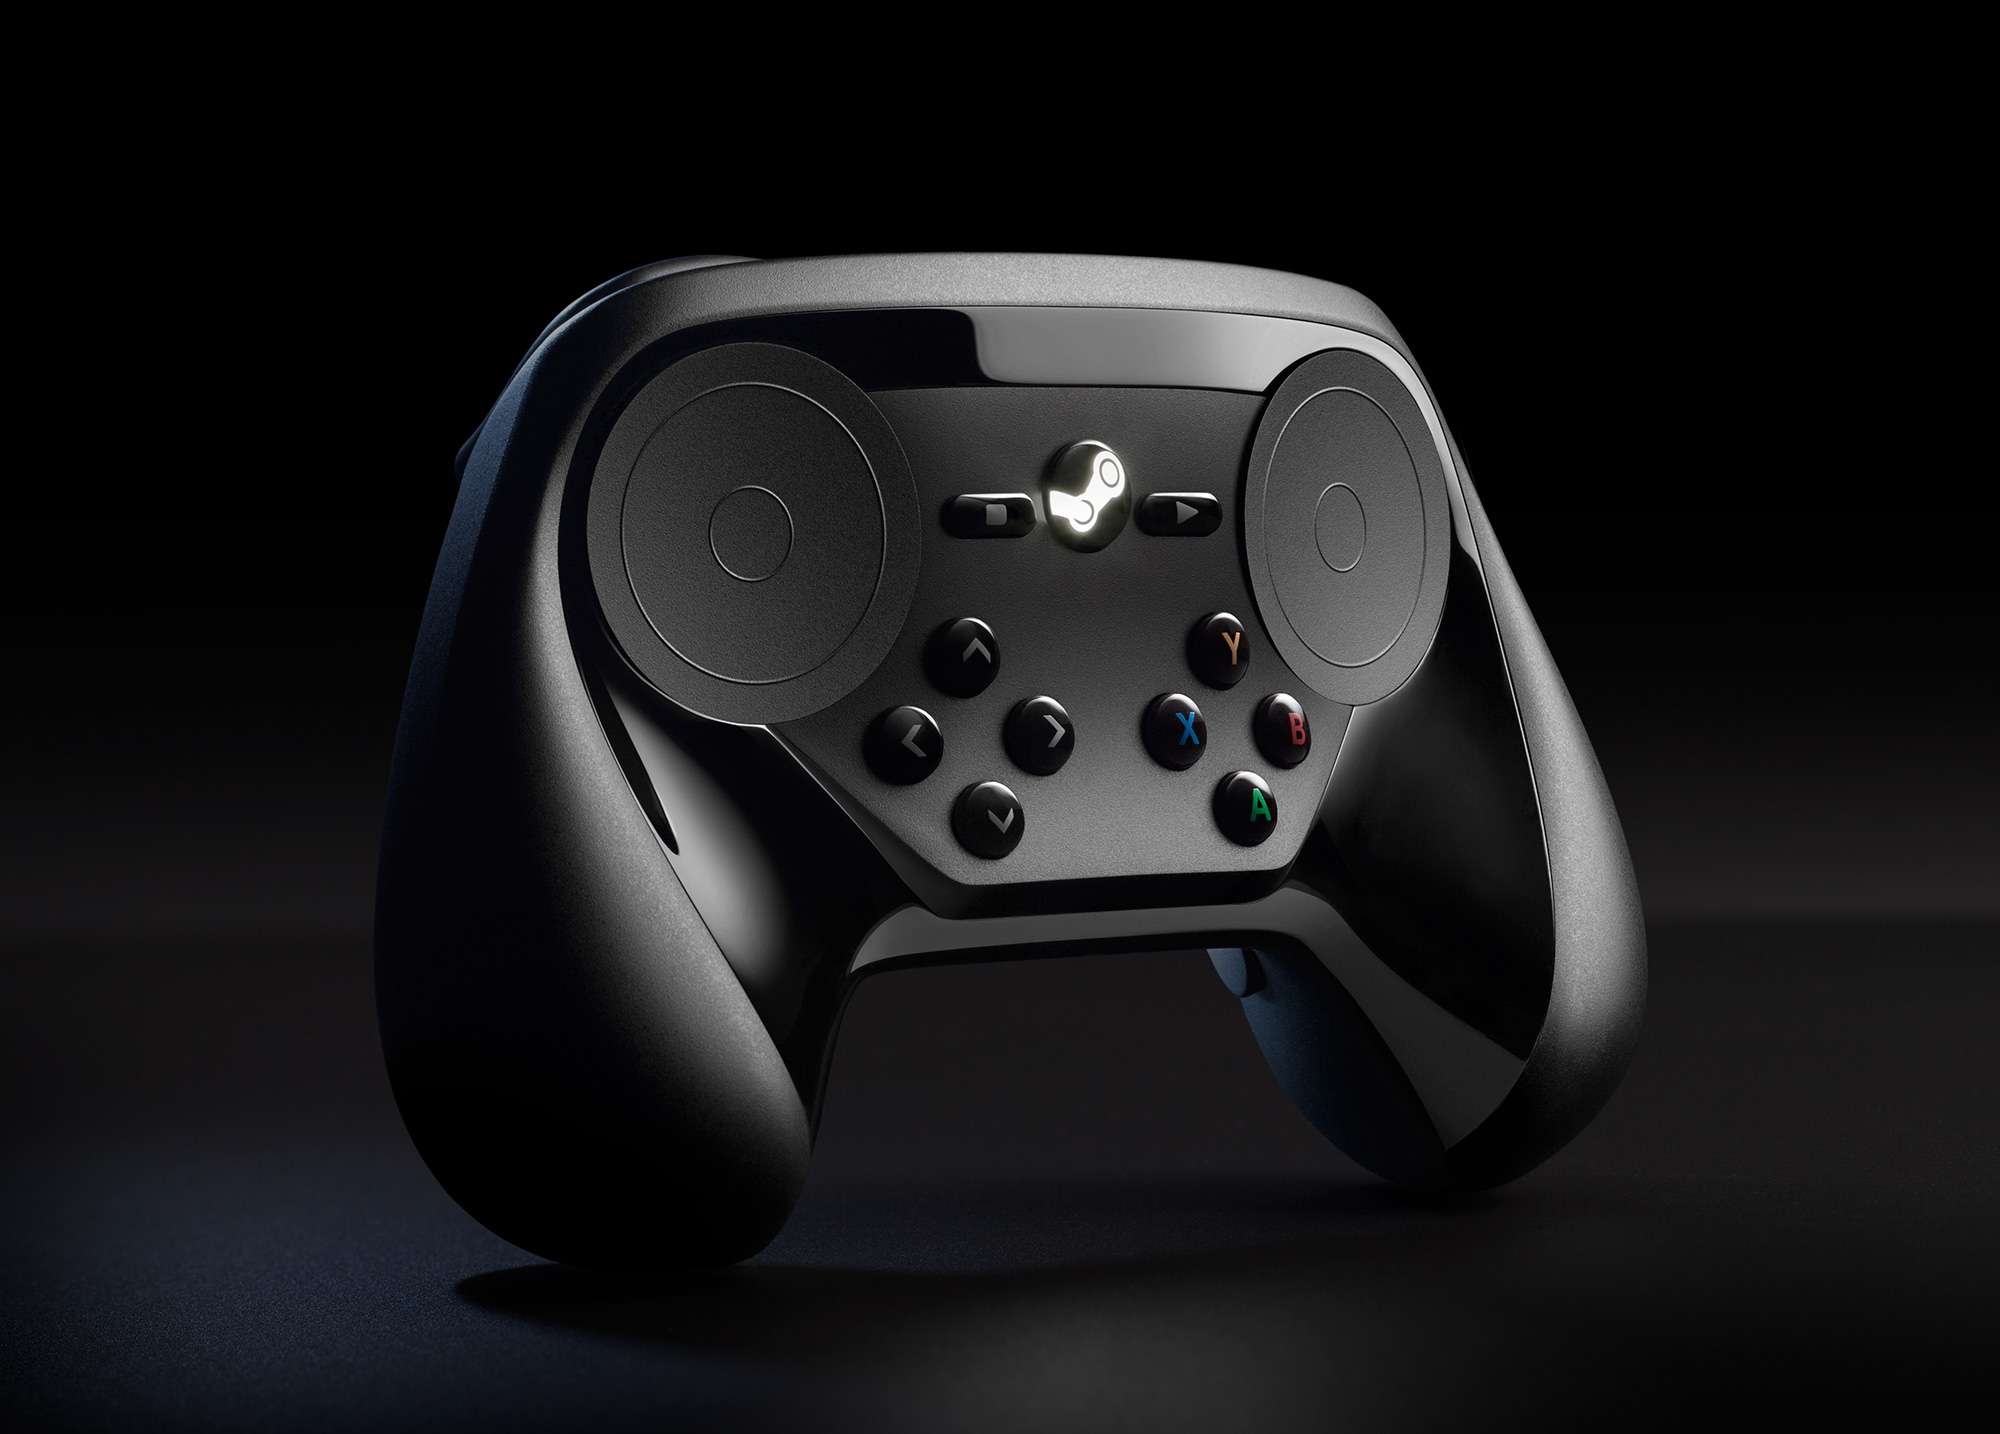 revised Steam Controller